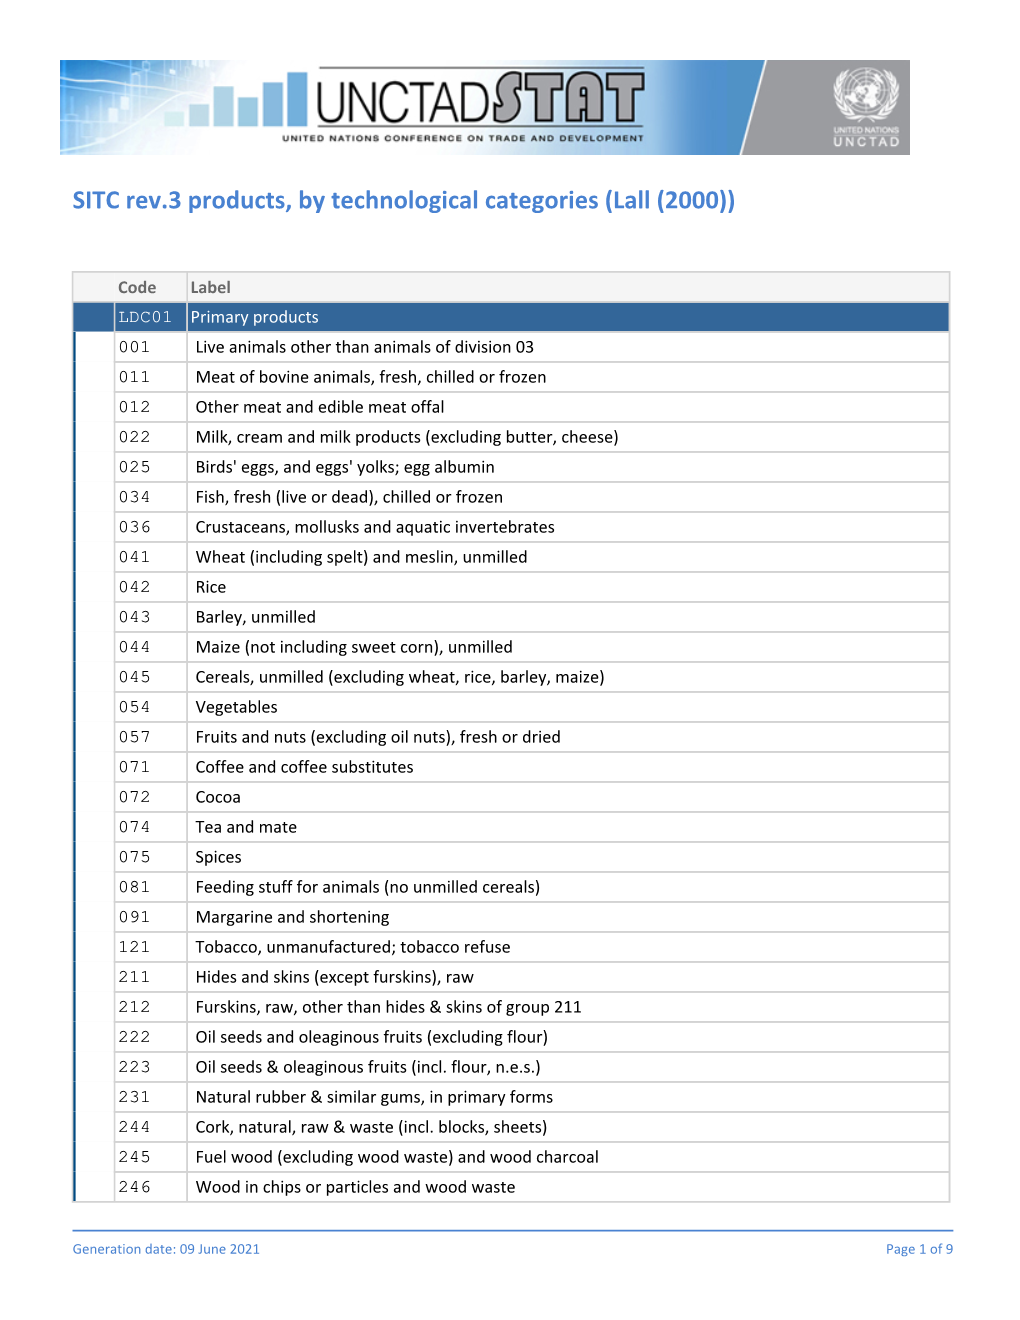 SITC Rev.3 Products, by Technological Categories (Lall (2000))